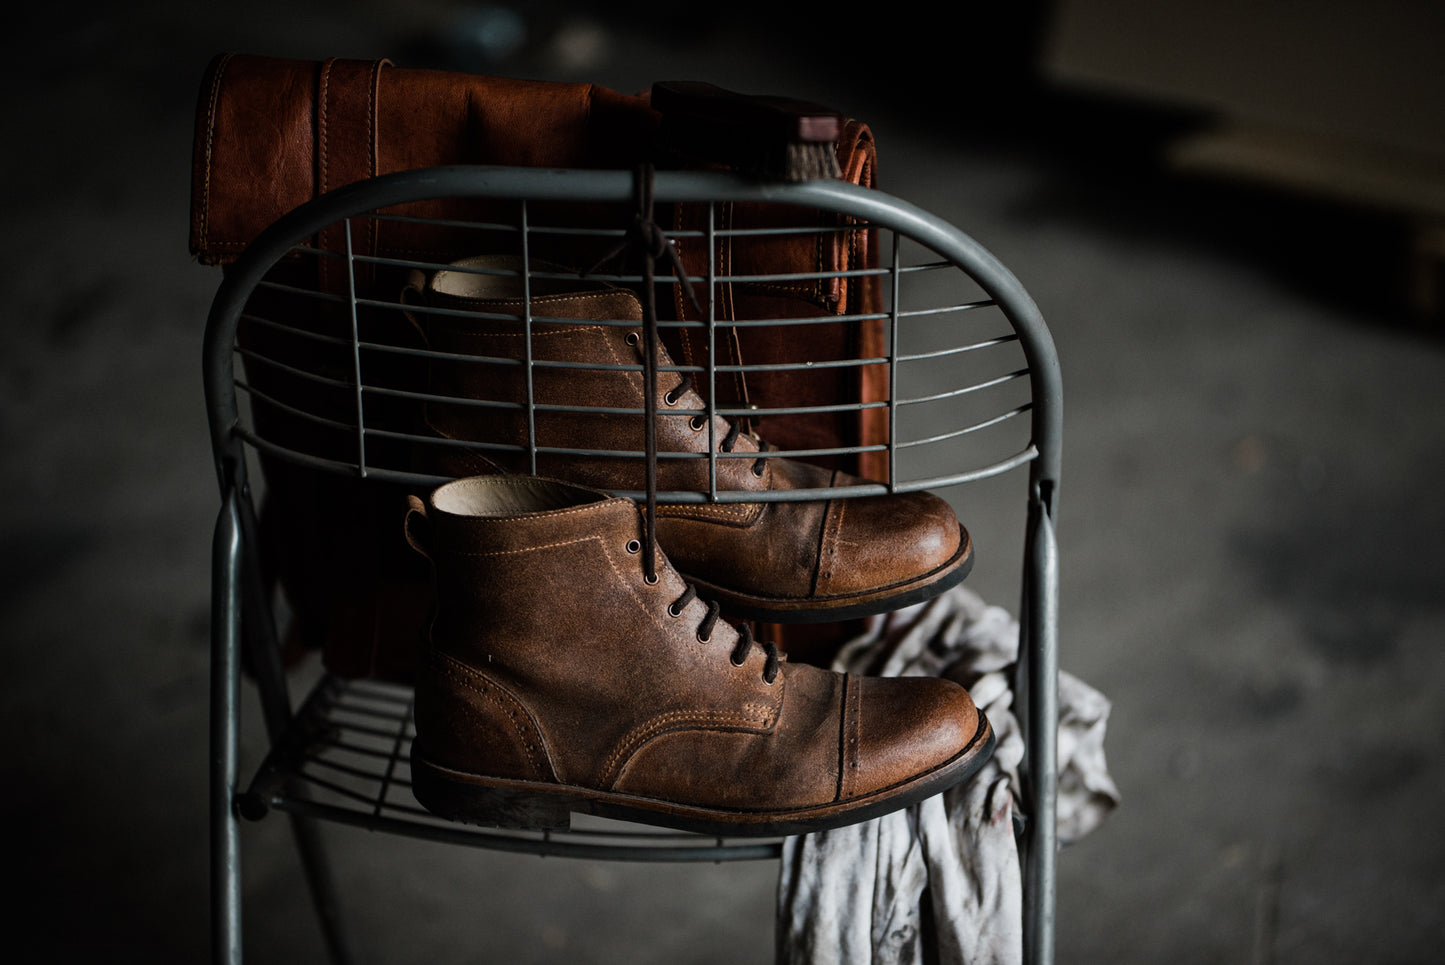 Tejo Boots - OldMulla - Boots Store, Handmade By George